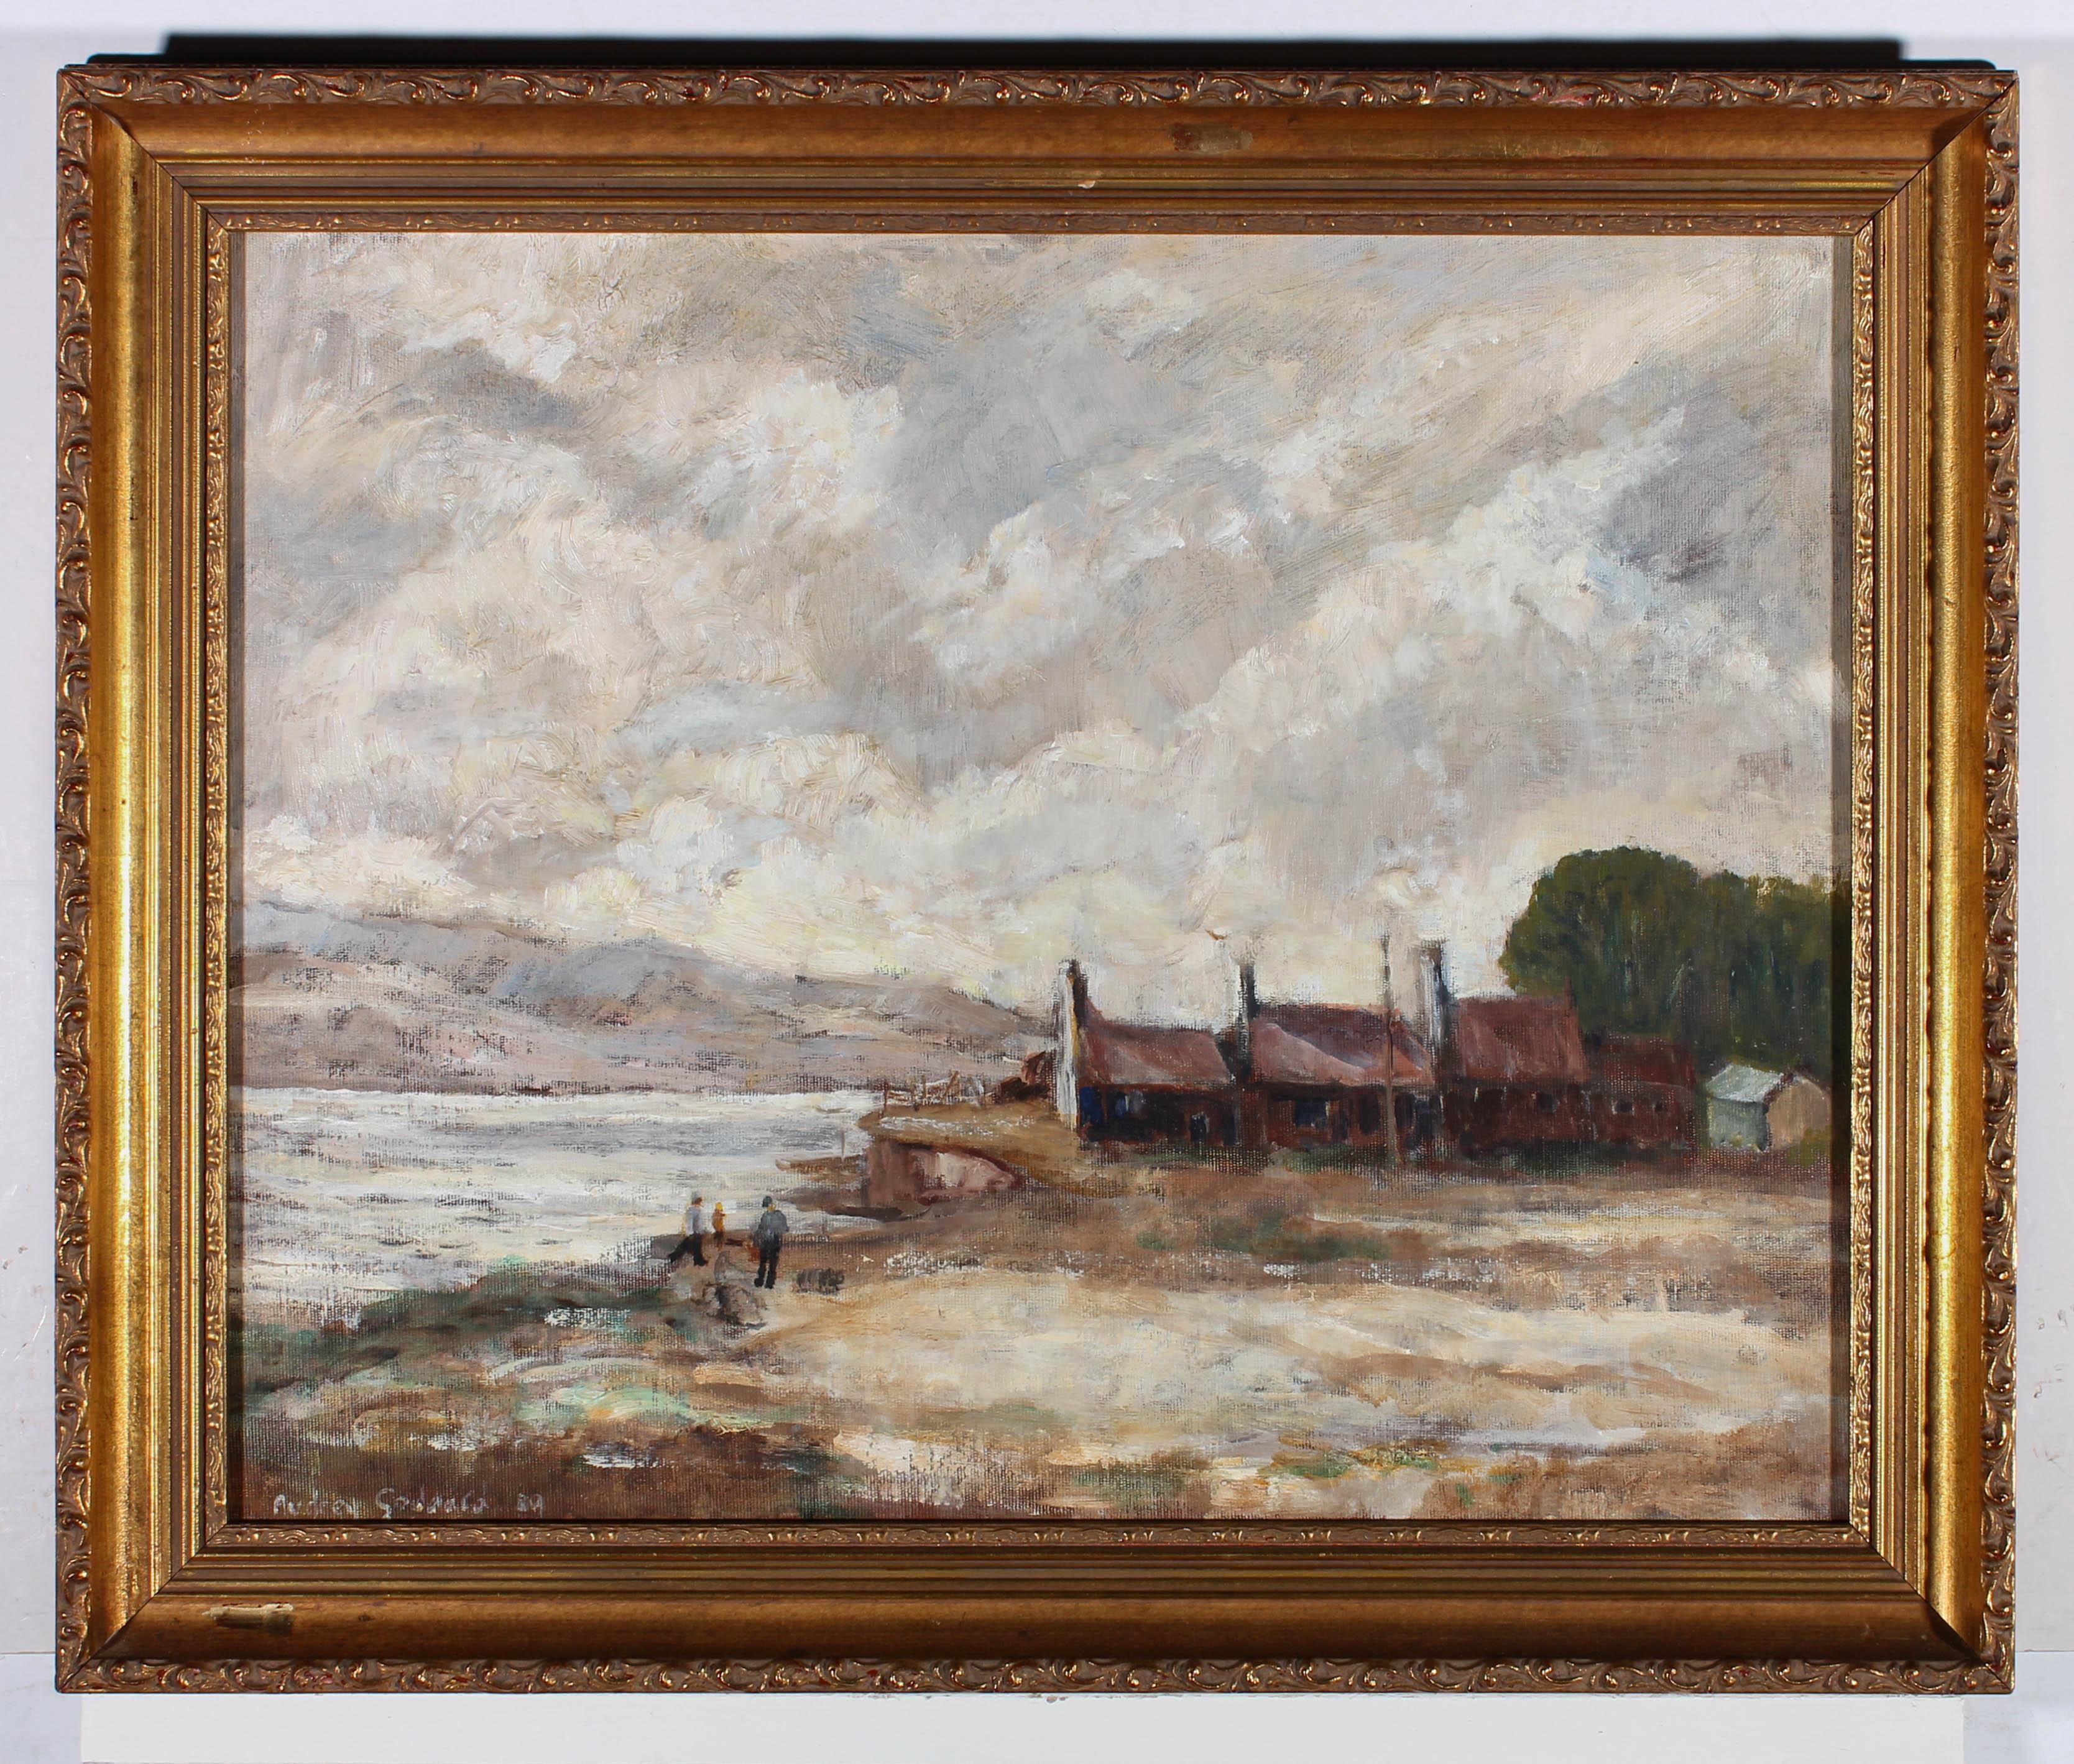 An expressive oil painting of 'The Boots' by artist Aurdery Goddard. Figures can be seen walking their dogs along the estuary on the left-hand, continuing towards a group of red brick storage buildings. The muted colour palette suggest a dull, drawn